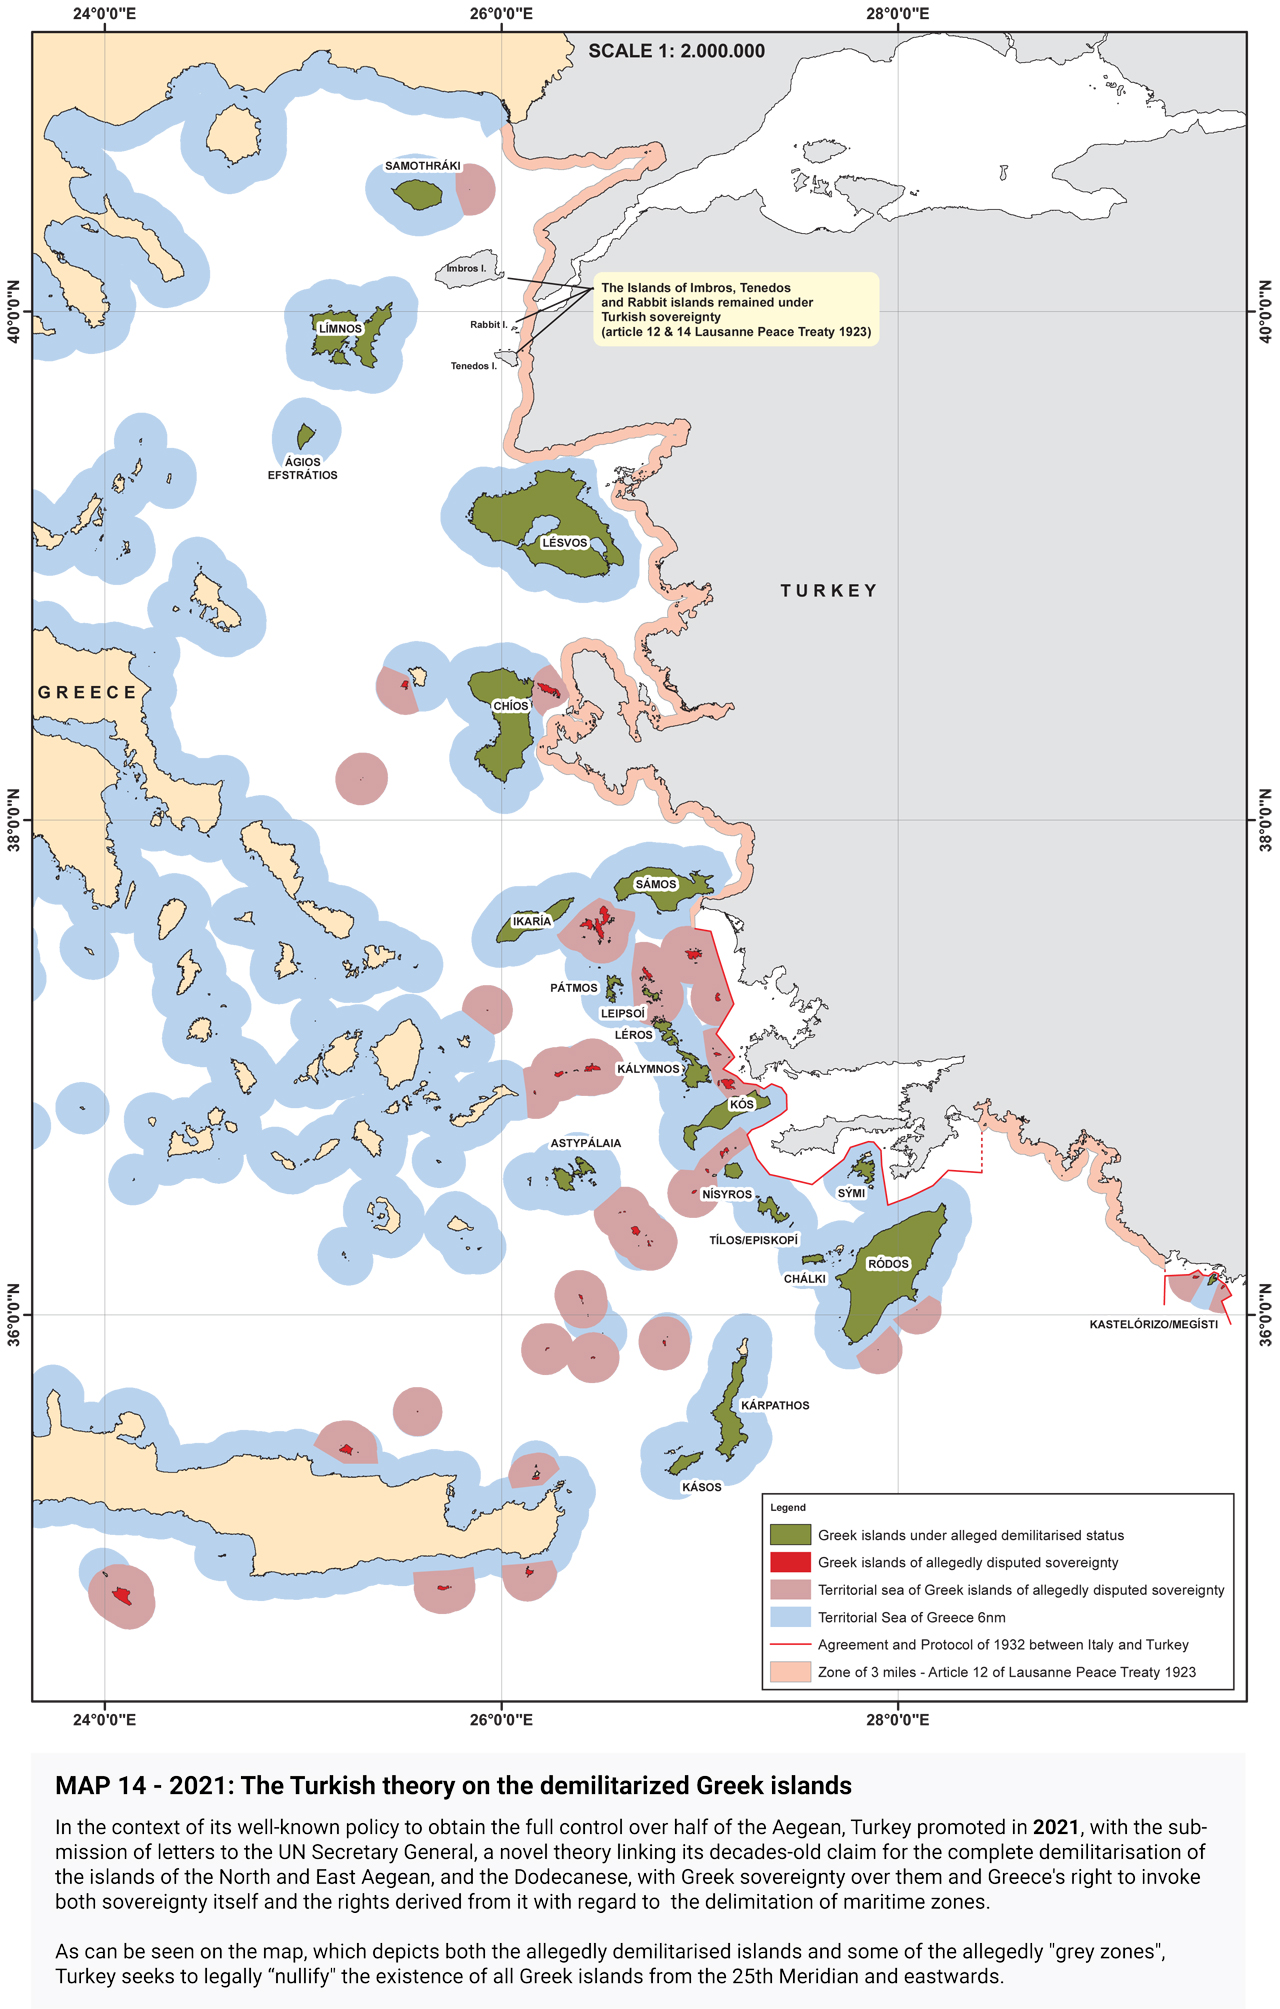 greece-responds-to-turkish-claims-about-islands-with-maps27